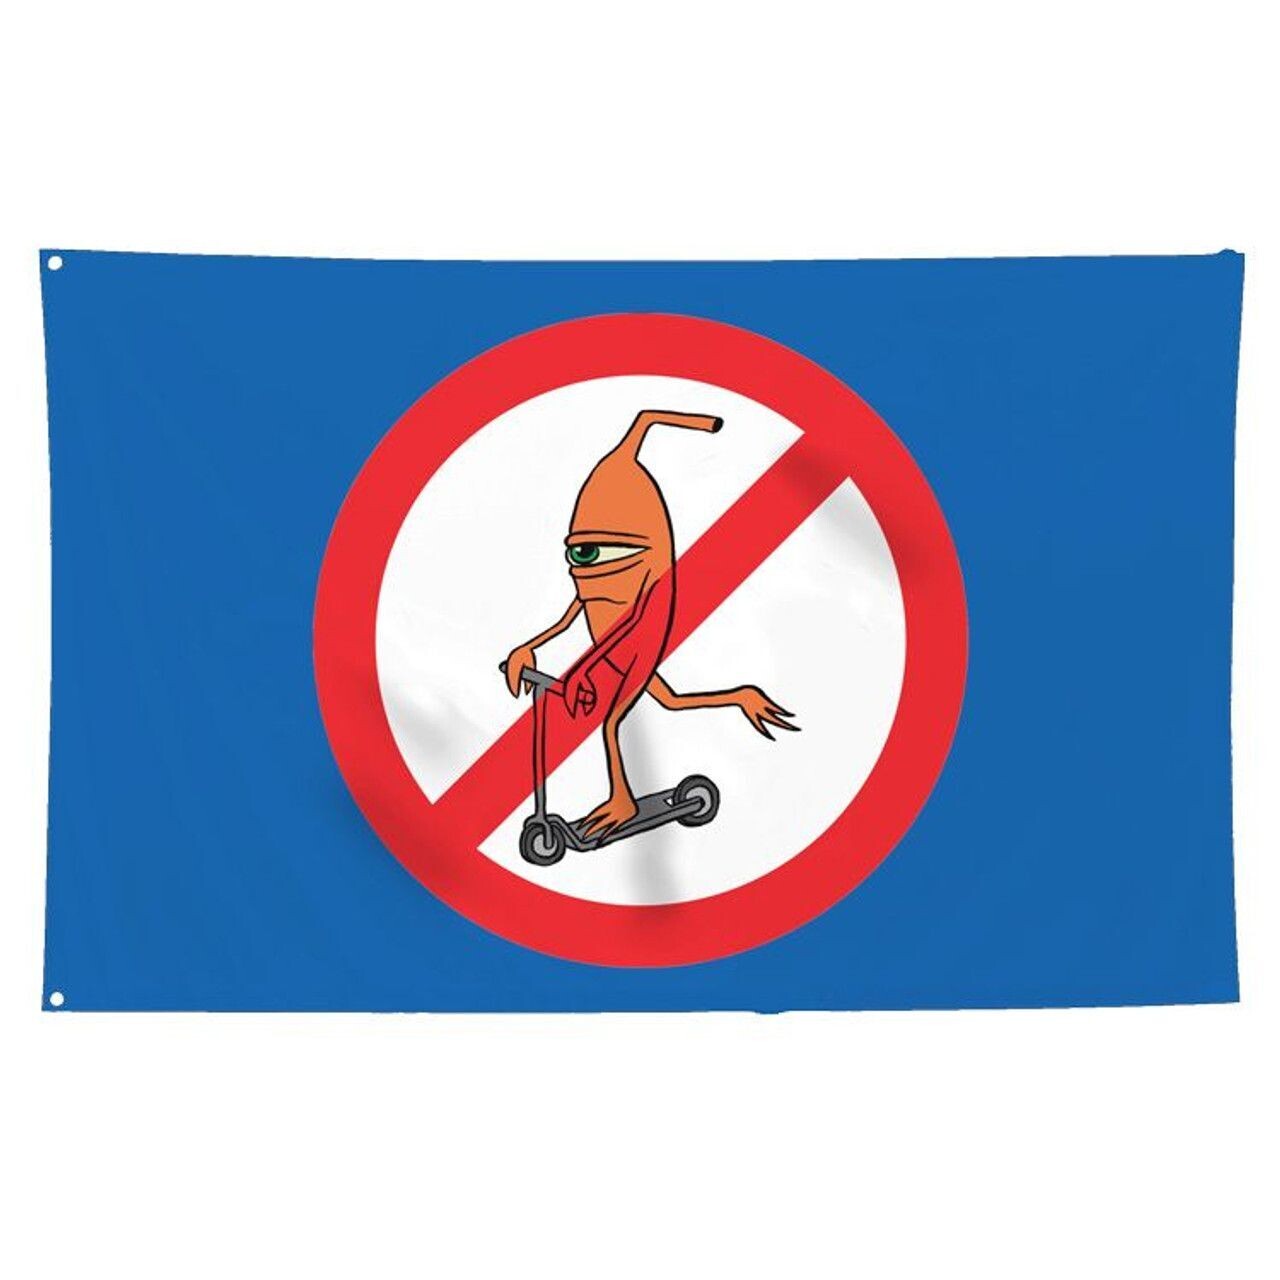 Toy Machine No Scooter Flag / Banner